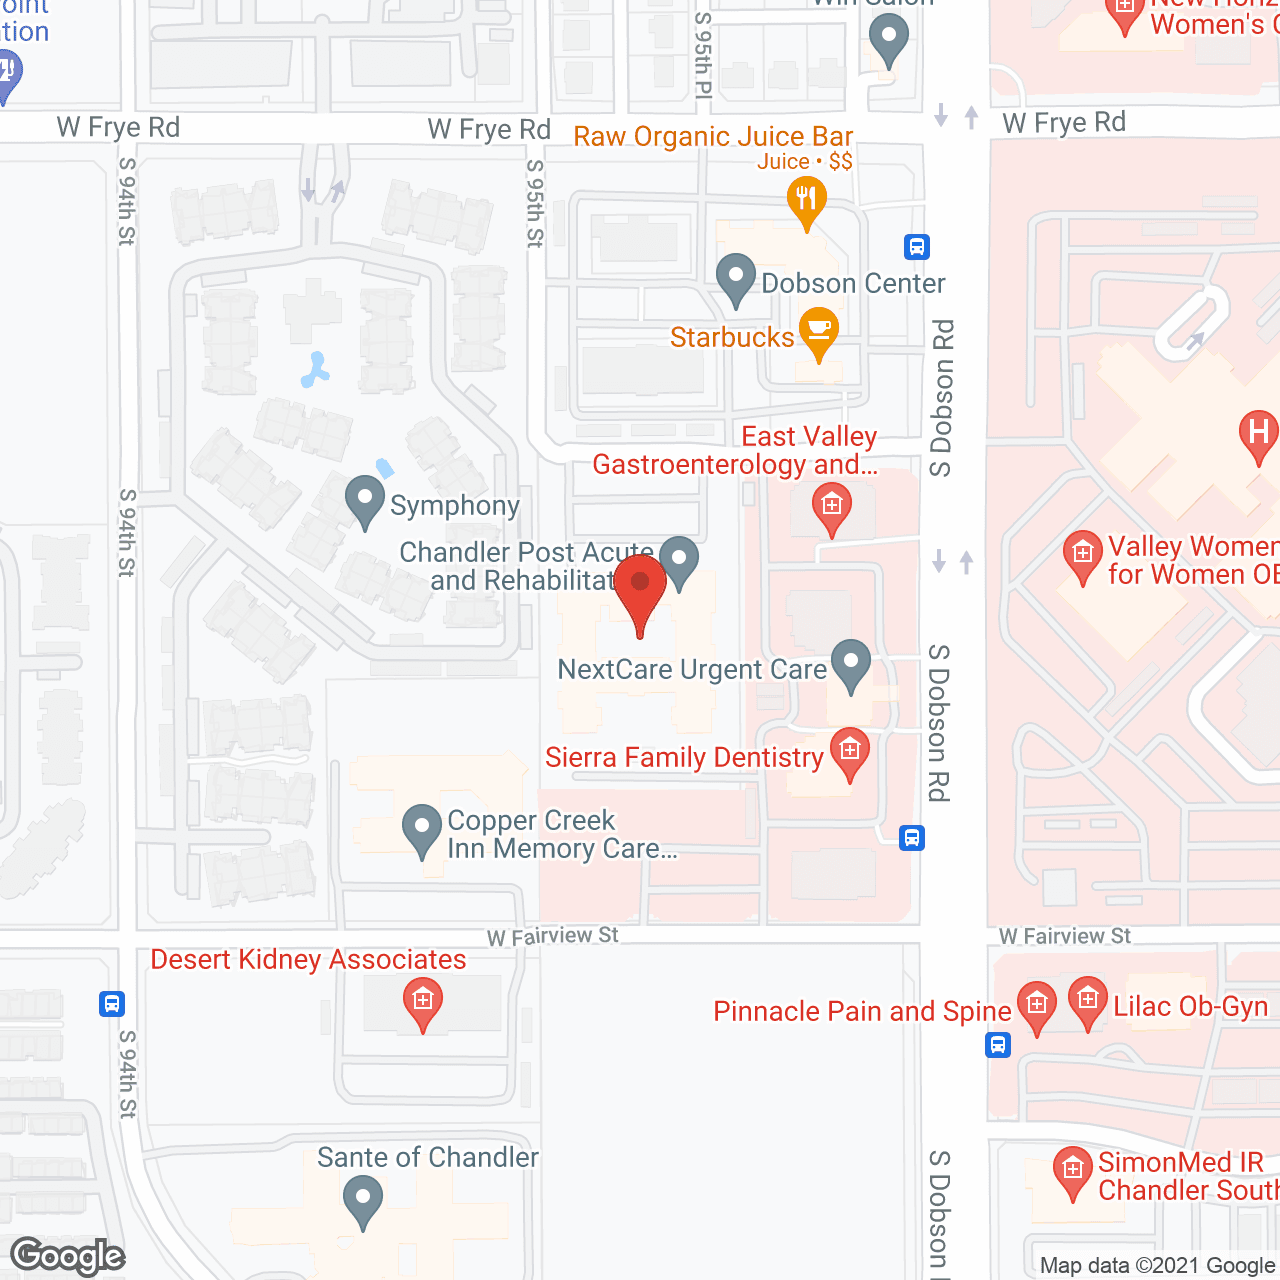 Chandler Post Acute and Rehabilitation in google map